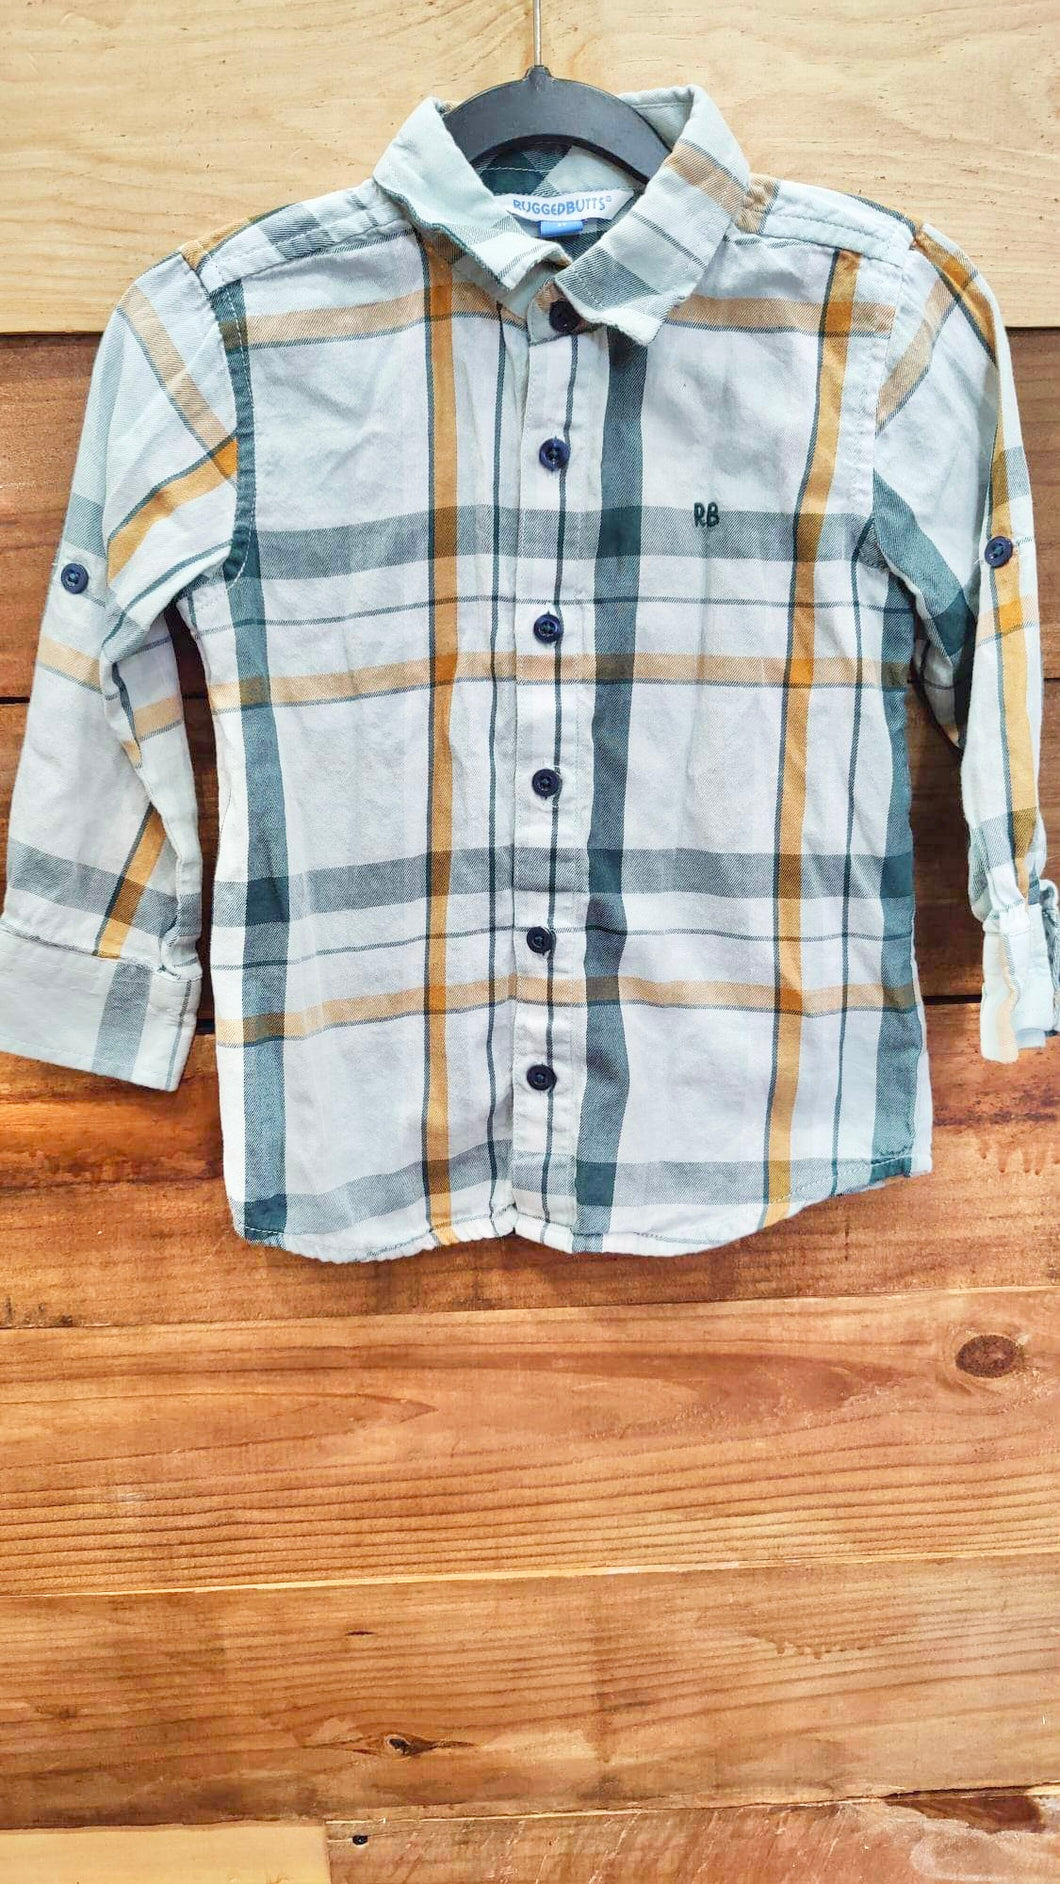 Rugged Butts Green Plaid Shirt Size 3T